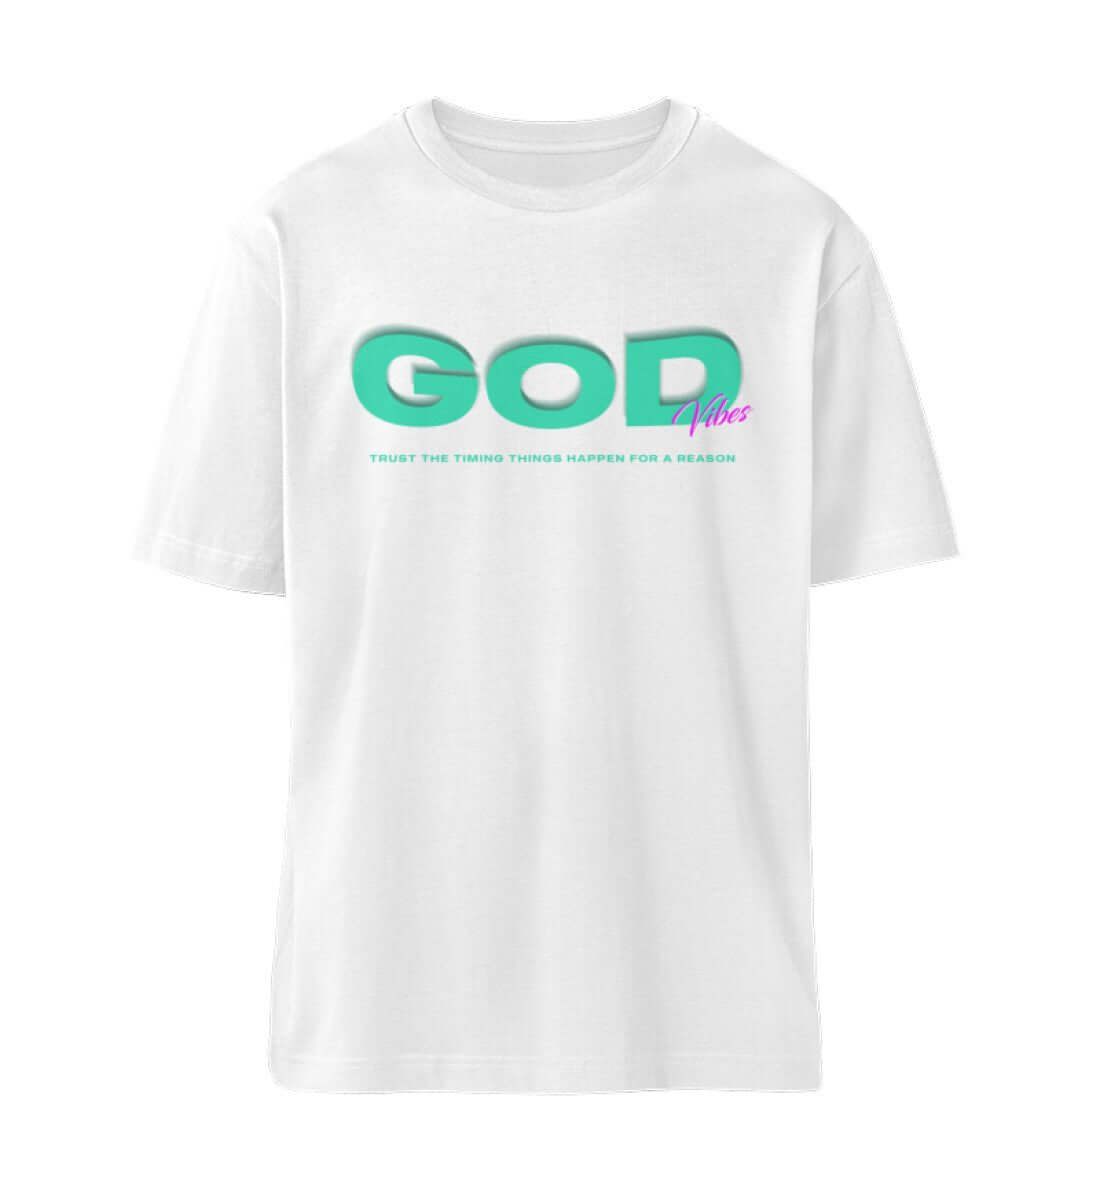 'TRUST THE TIMING' OVERSIZED TEE - GODVIBES